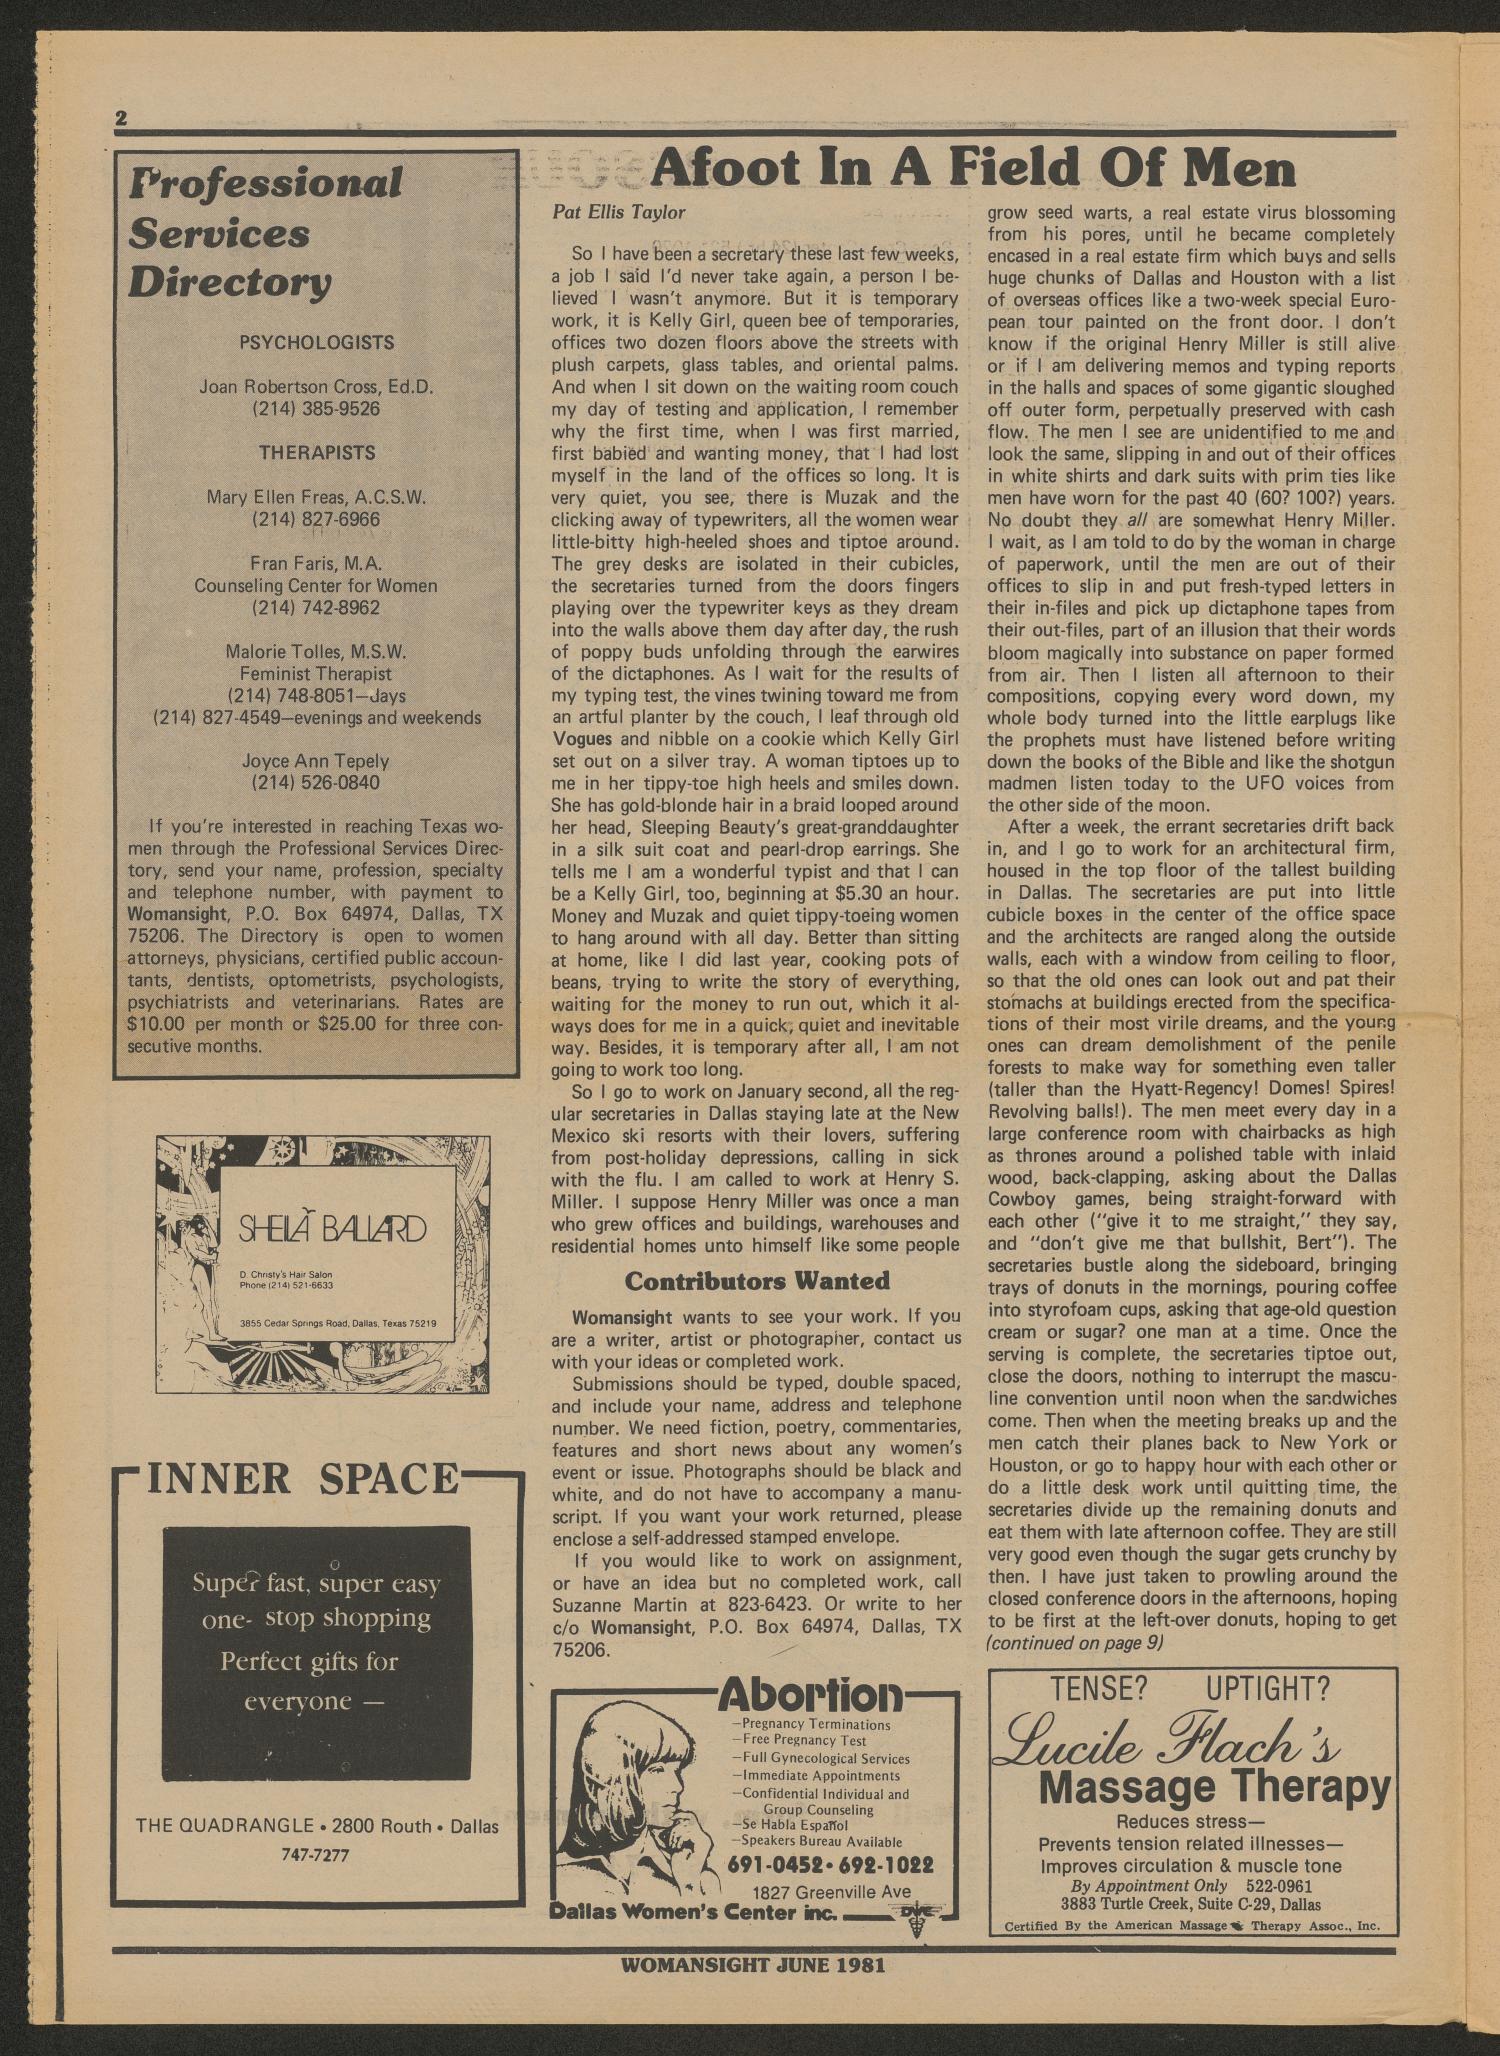 Womansight: News for North Texas Women, Volume 2, Number 1, June 1981
                                                
                                                    2
                                                